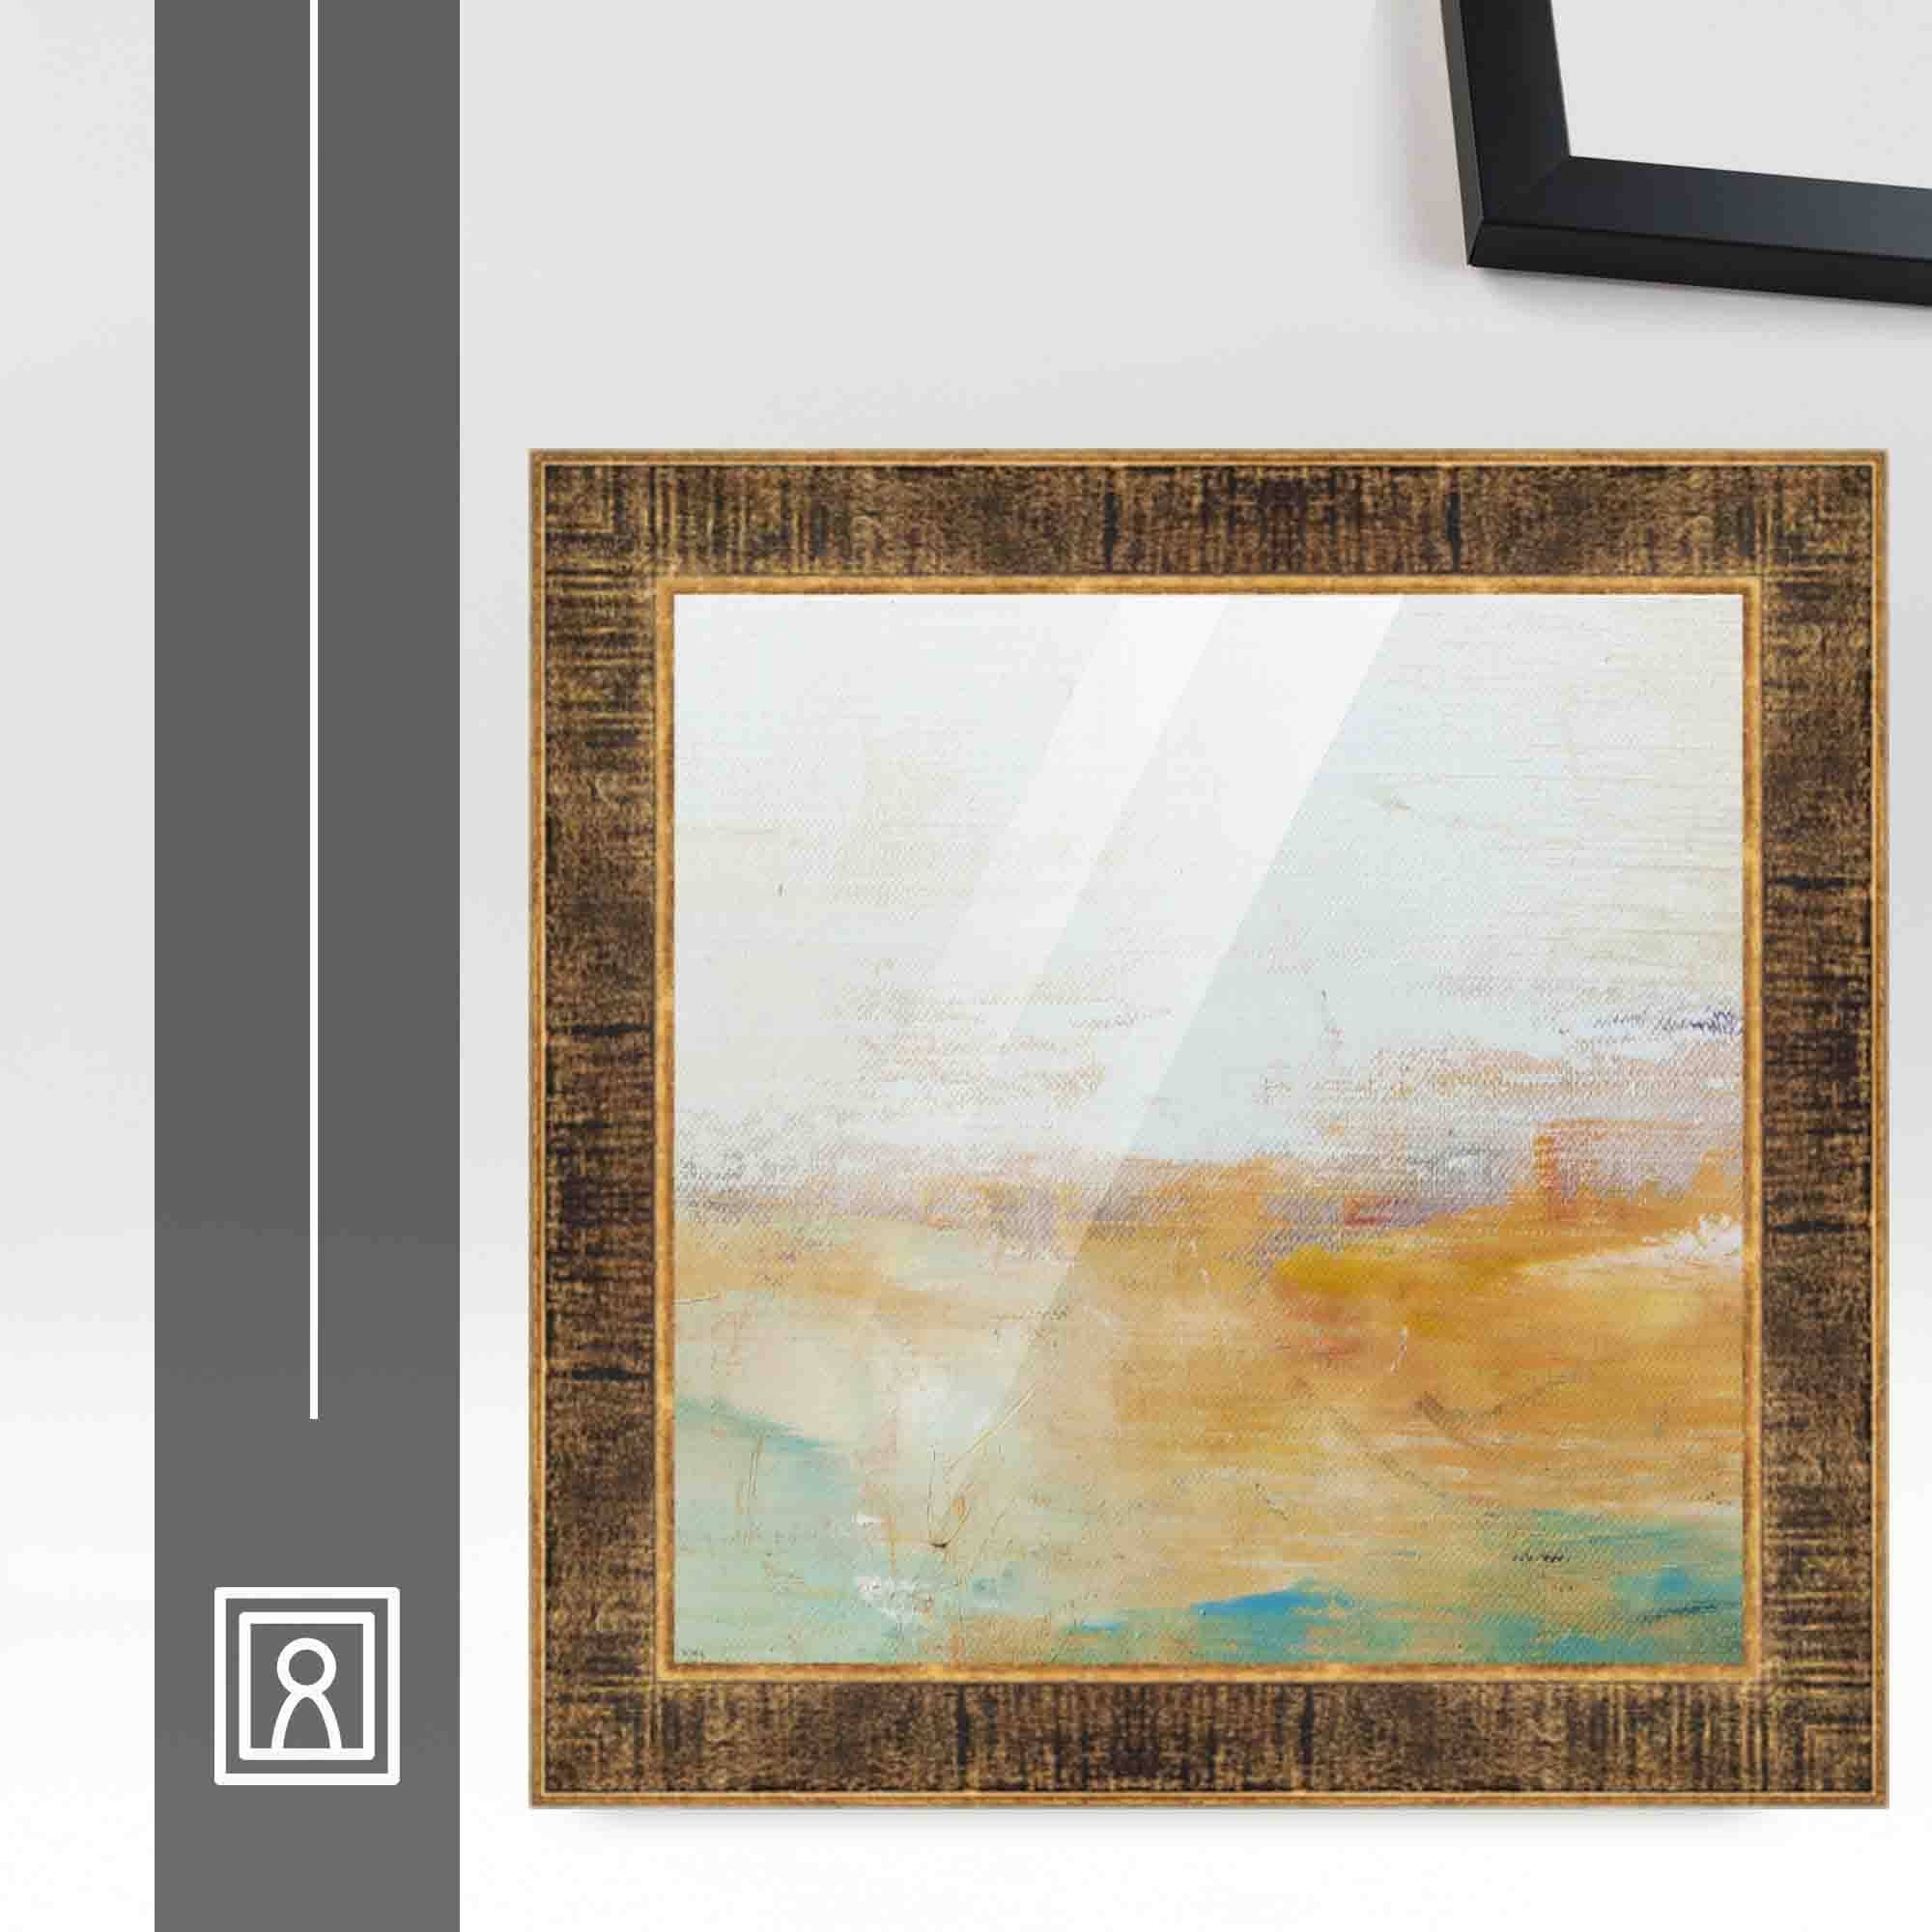 CustomPictureFrames.com 20x20 Frame Black Real Wood Picture Frame Width 1.5 Inches | Interior Frame Depth 0.5 Inches | Sonoma Gold Distressed Photo